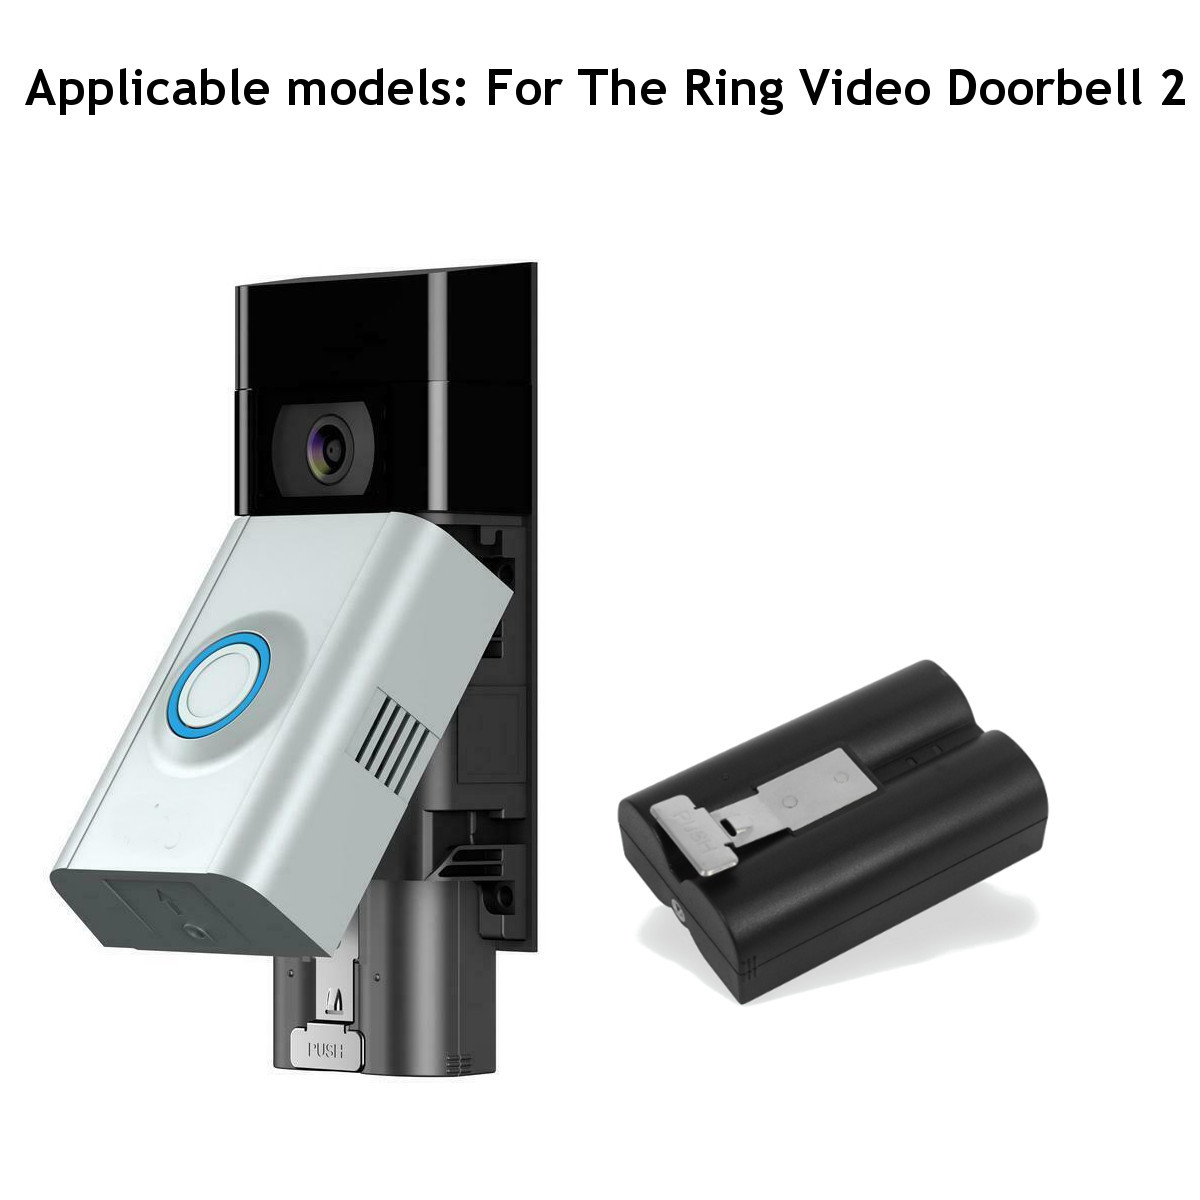 Rechargeable-Battery-Pack-For-The-Ring-Video-Doorbell-2-Power-1632293-5